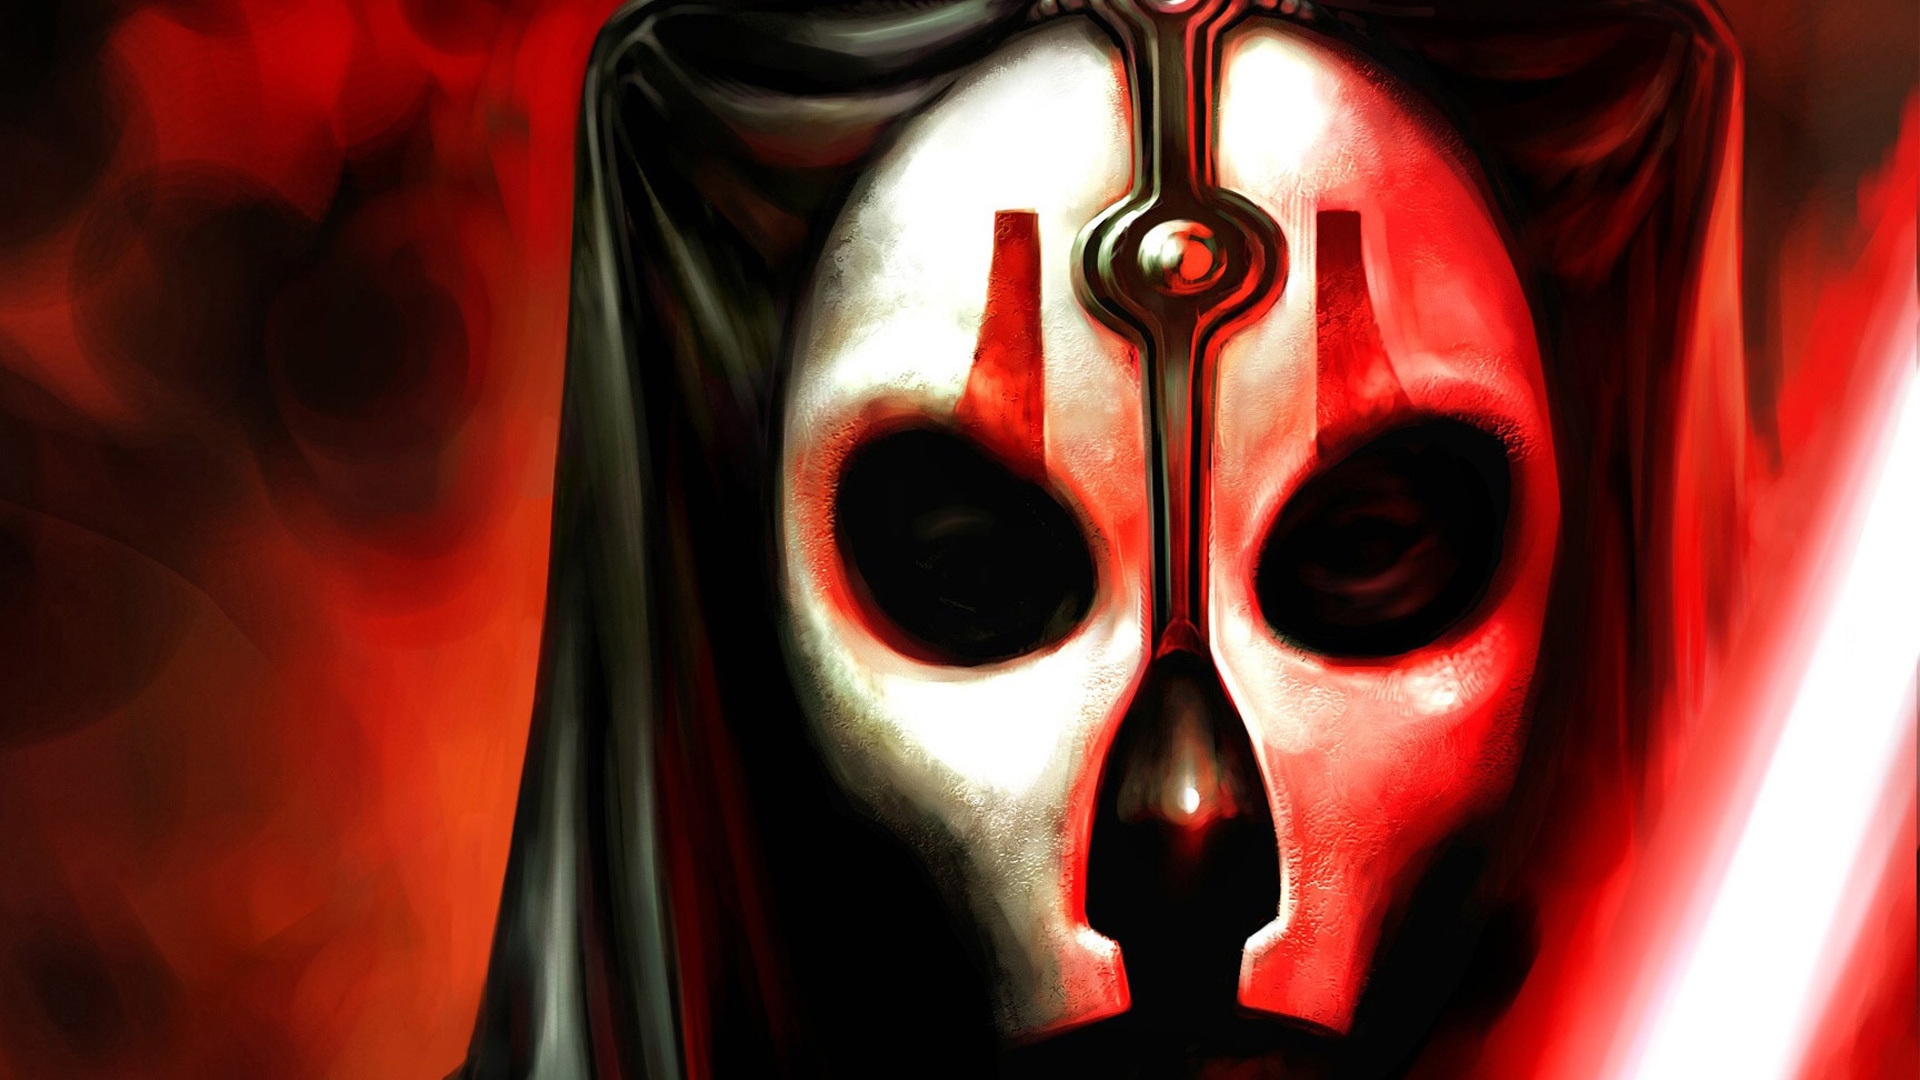 Star Wars Knights of the Old Republic for 1920 x 1080 HDTV 1080p resolution